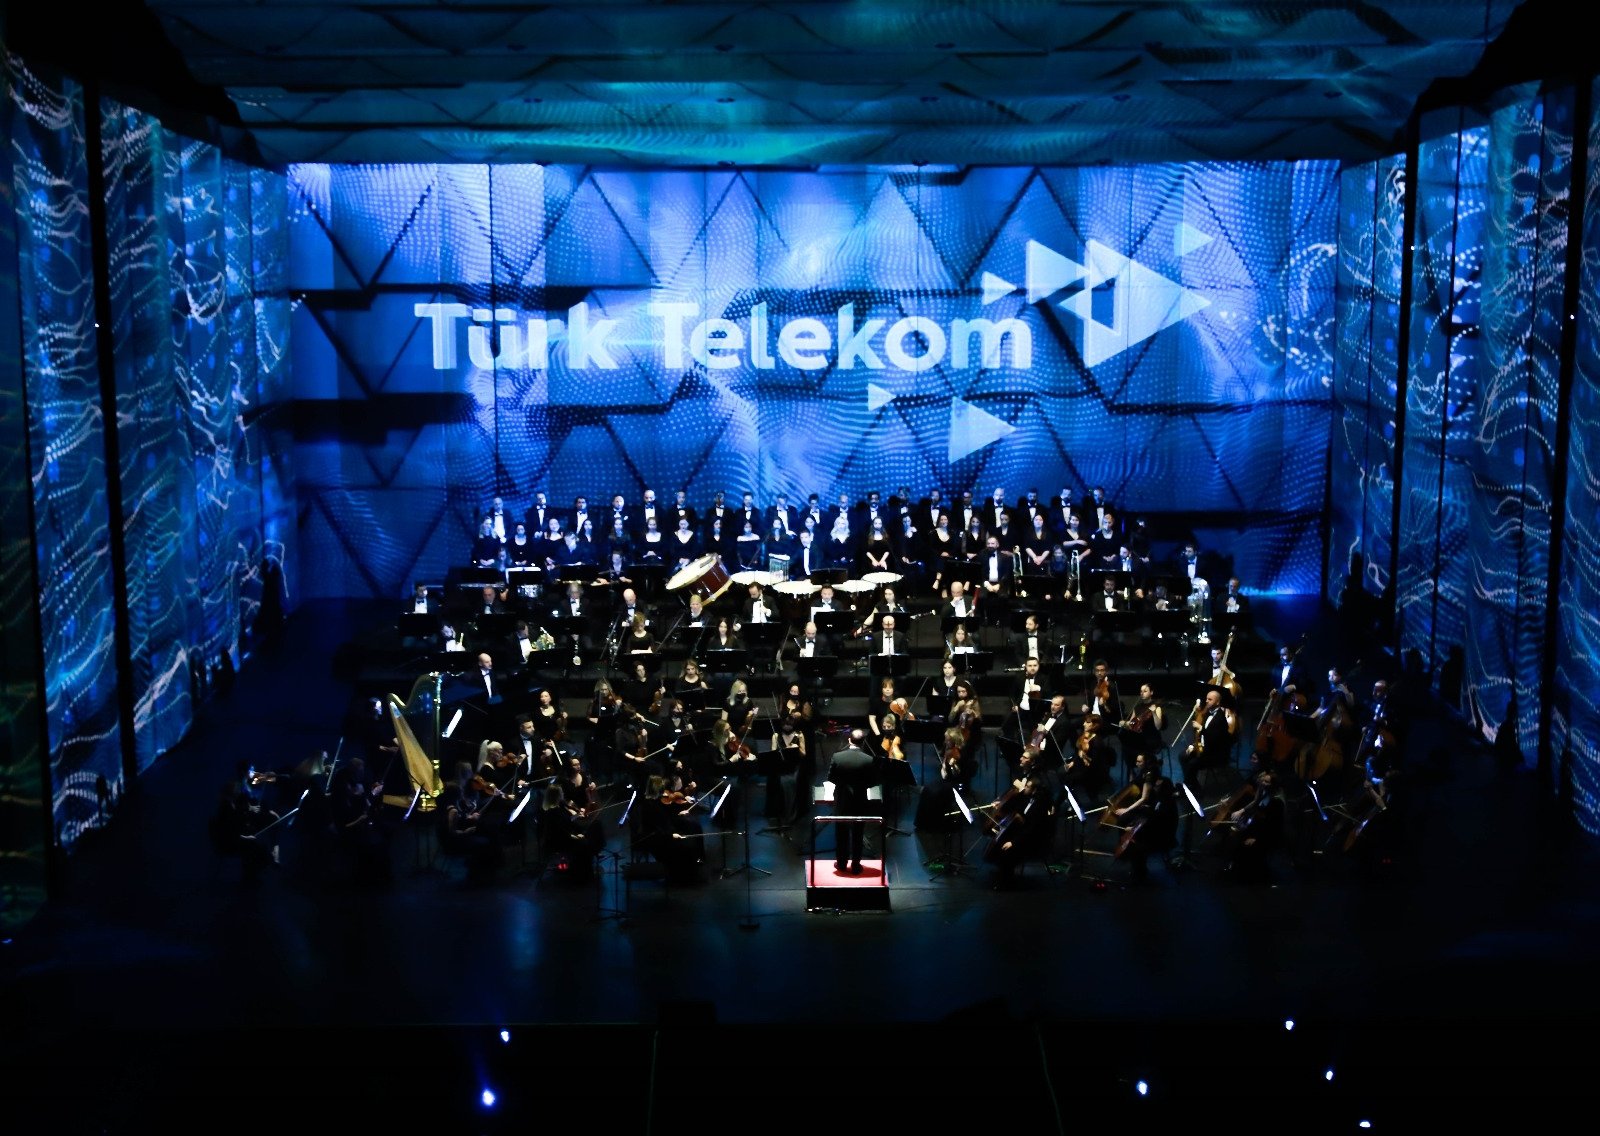 A view from the performance of the Istanbul State Symphony Orchestra at the gala night of Türk Telekom Opera Hall in AKM, Istanbul, Turkey, May 18, 2022. (Courtesy of Türk Telekom)